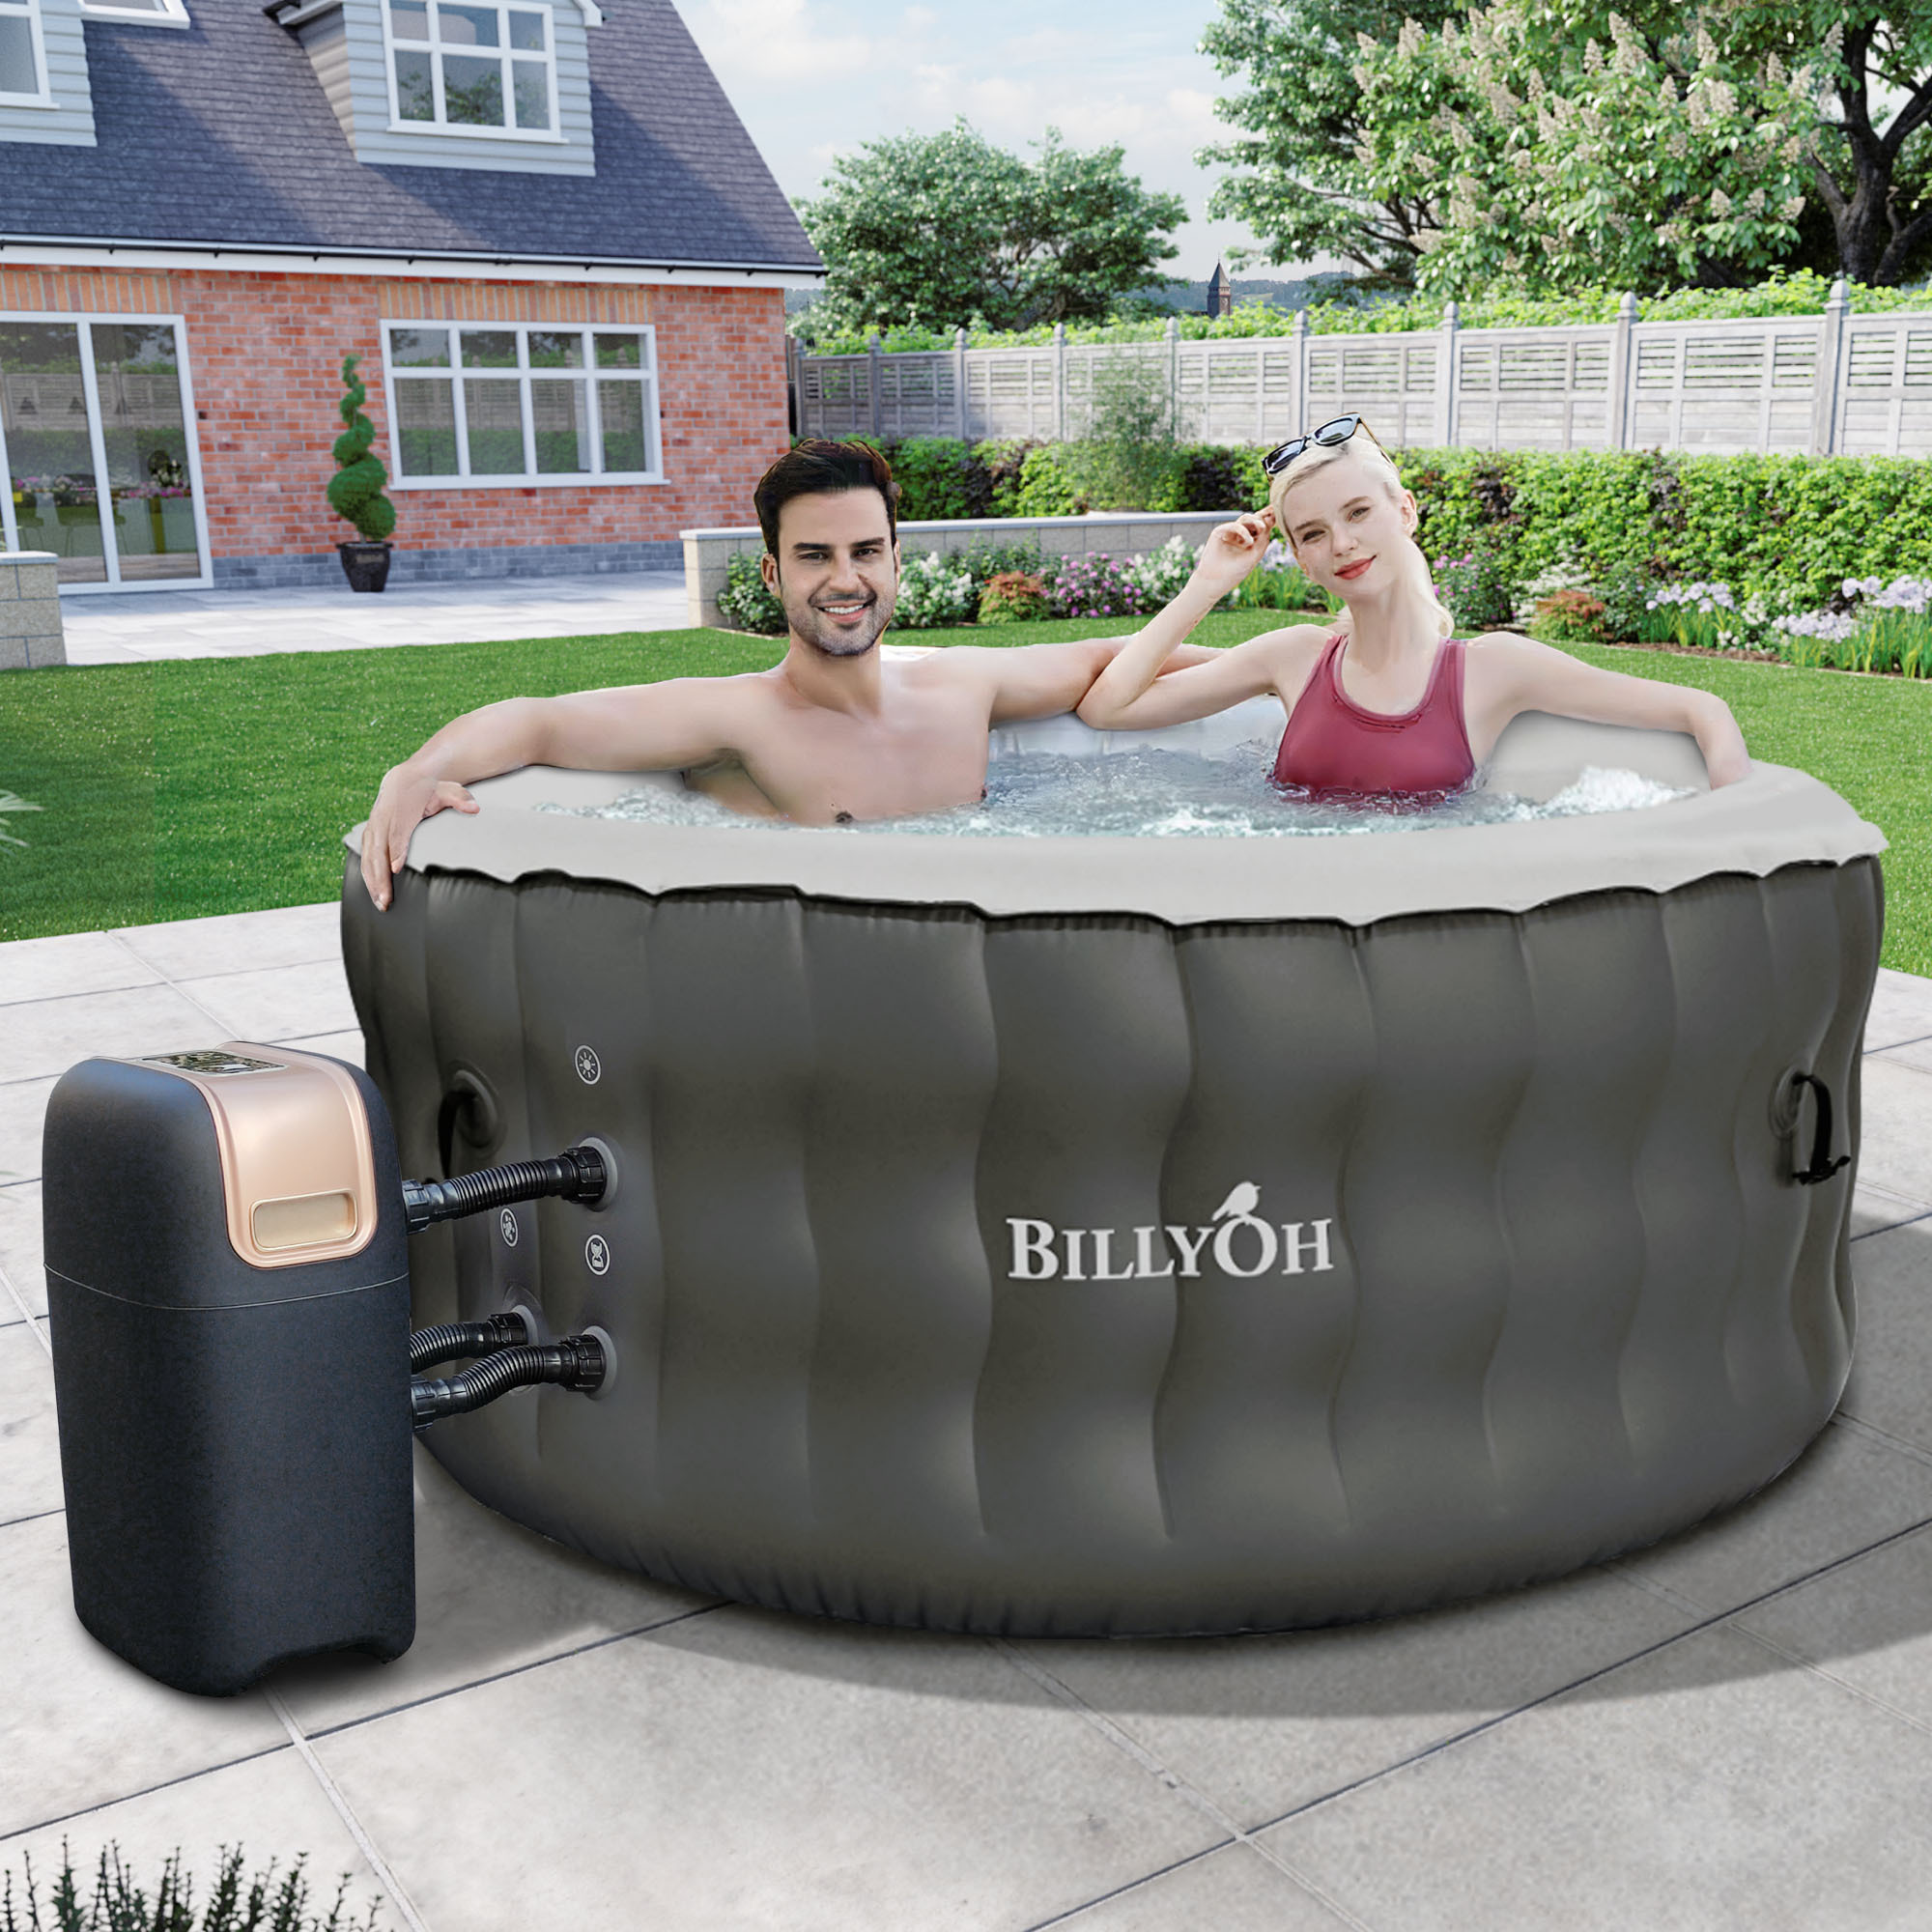 Respiro Inflatable Hot Tub with Jets 4-6 People | BillyOh